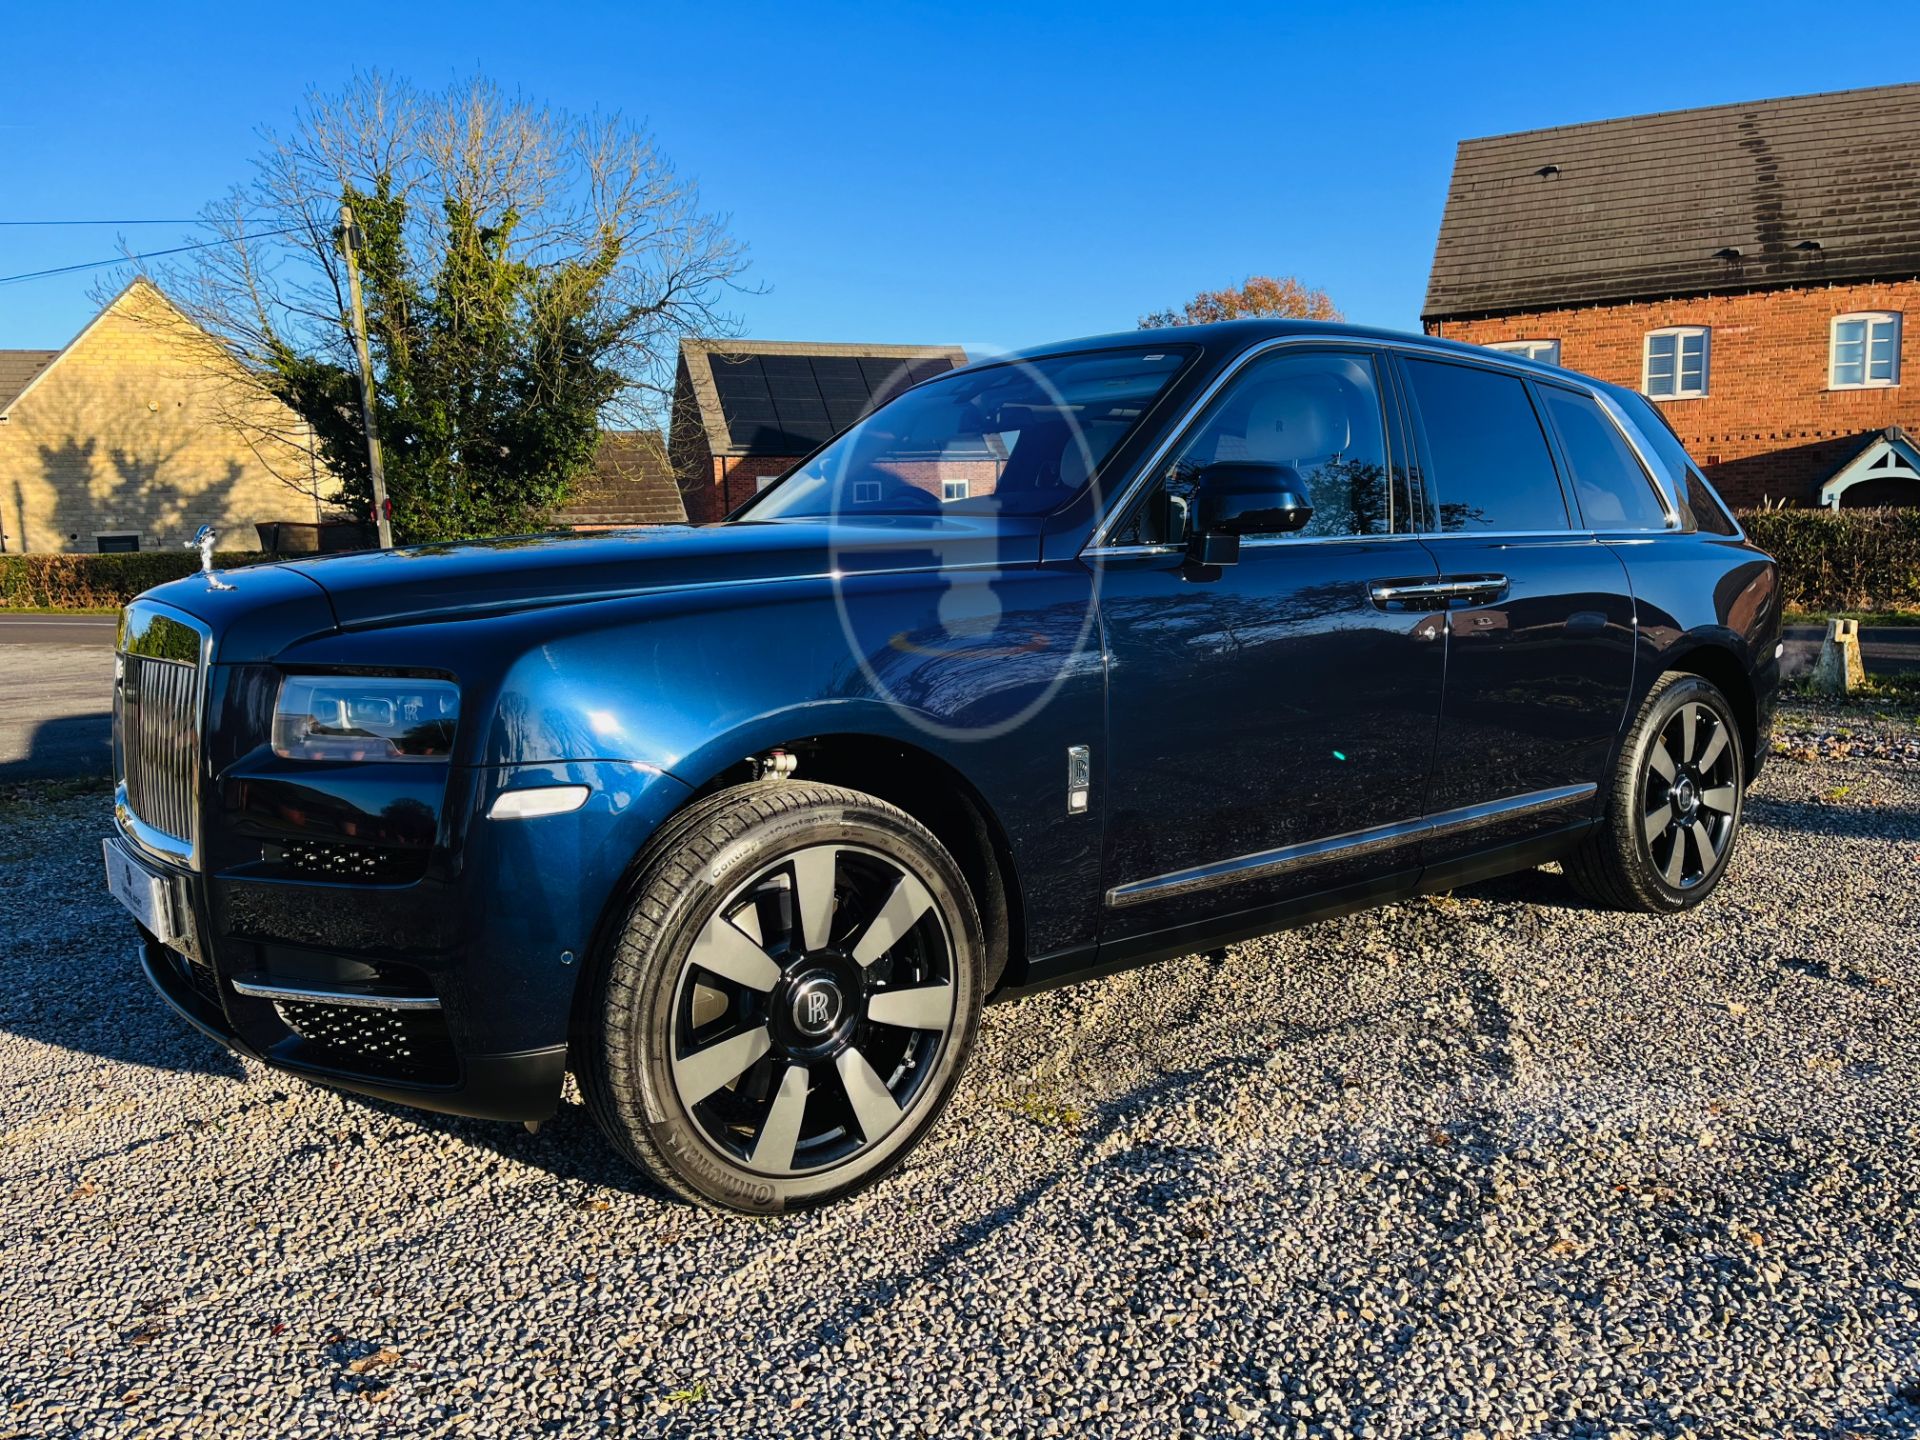 ROLLS ROYCE CULLINAN SILVER BADGE V12 6.75L (23 REG) ULTIMATE LUXURY SUV - ONLY 2100 MILES -MUST SEE - Image 2 of 61